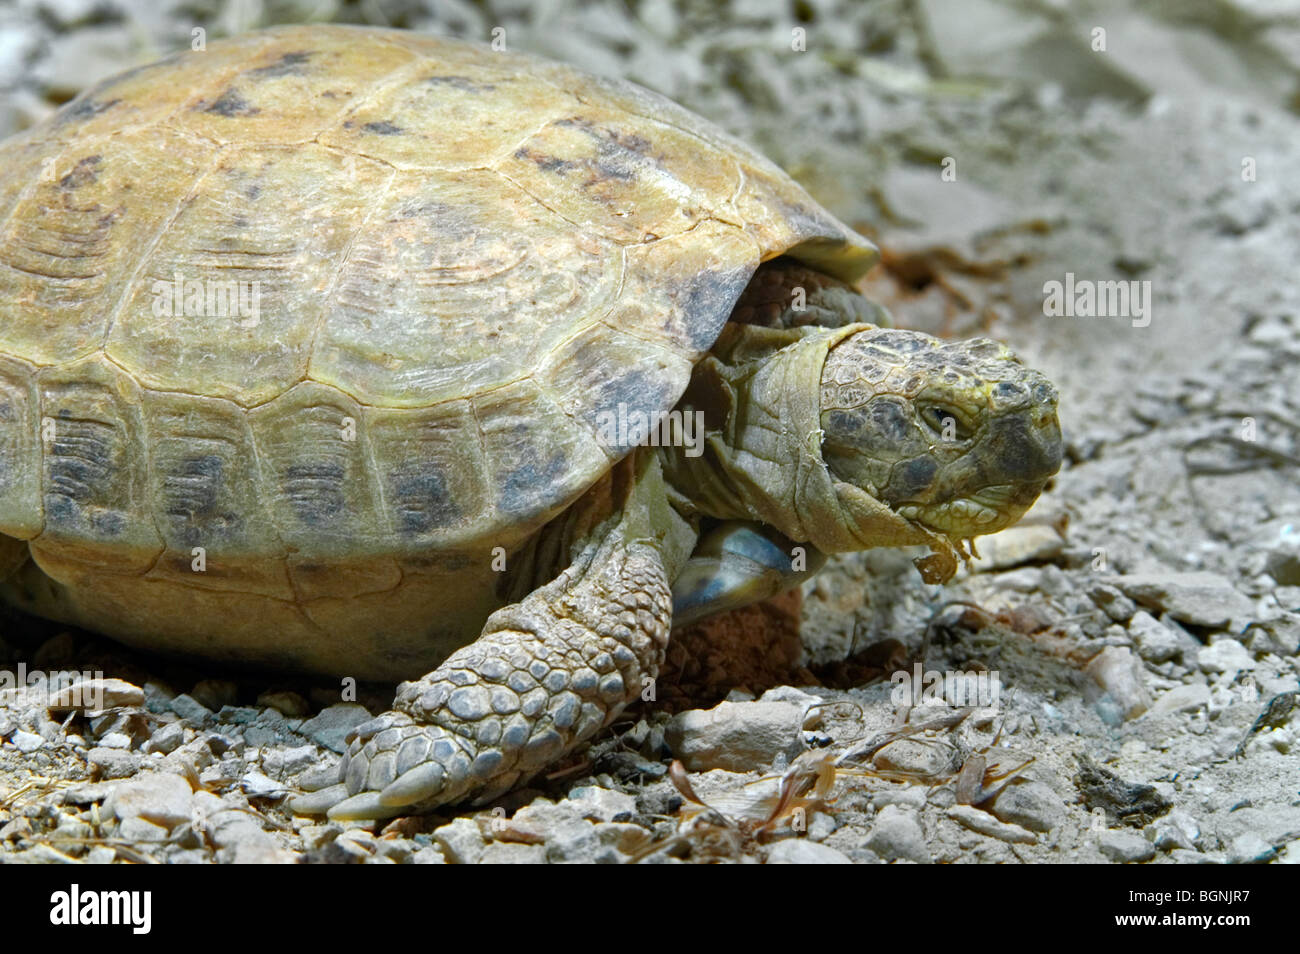 Russian tortoise / Horsfield's tortoise / Central Asian tortoise (Agrionemys horsfieldii / Testudo horsfieldii) native to Asia Stock Photo